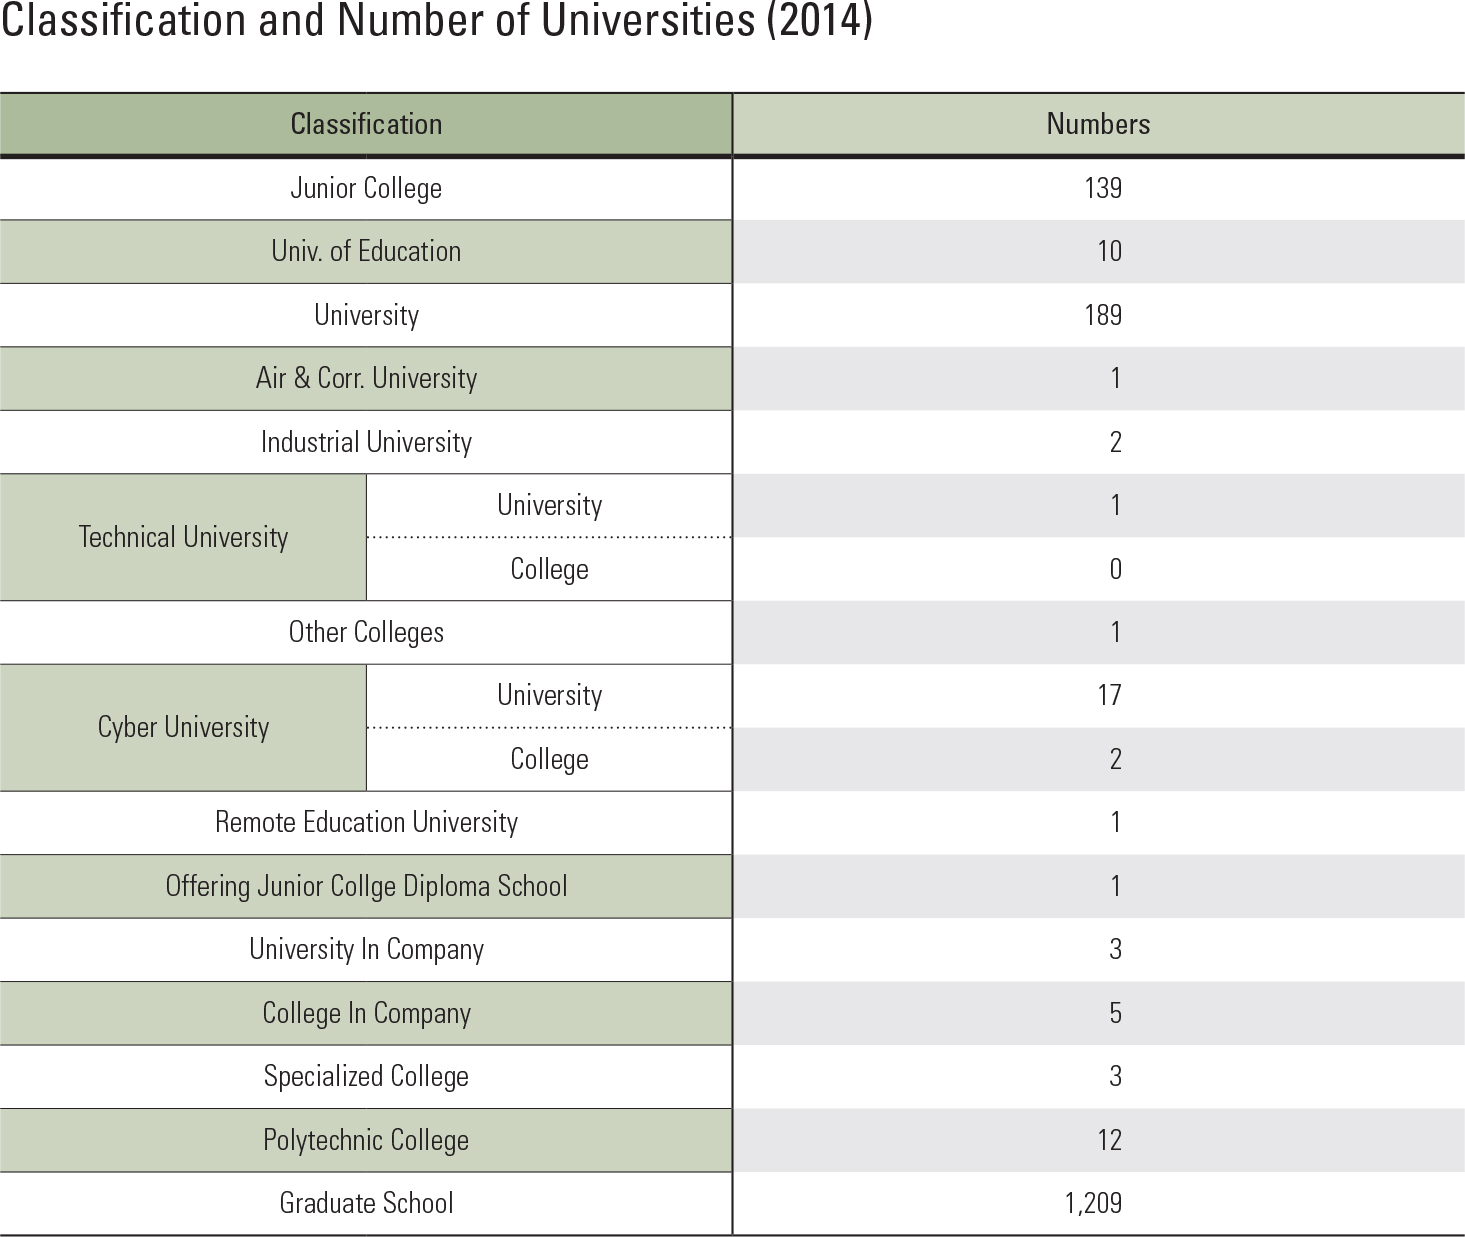 Classification and Number of Universities (2014)<p class="oz_zoom" zimg="http://imagedata.cafe24.com/us_3/us3_248-4_2.jpg"><span style="font-family:Nanum Myeongjo;"><span style="font-size:18px;"><span class="label label-danger">UPDATE DATA</span></span></p>